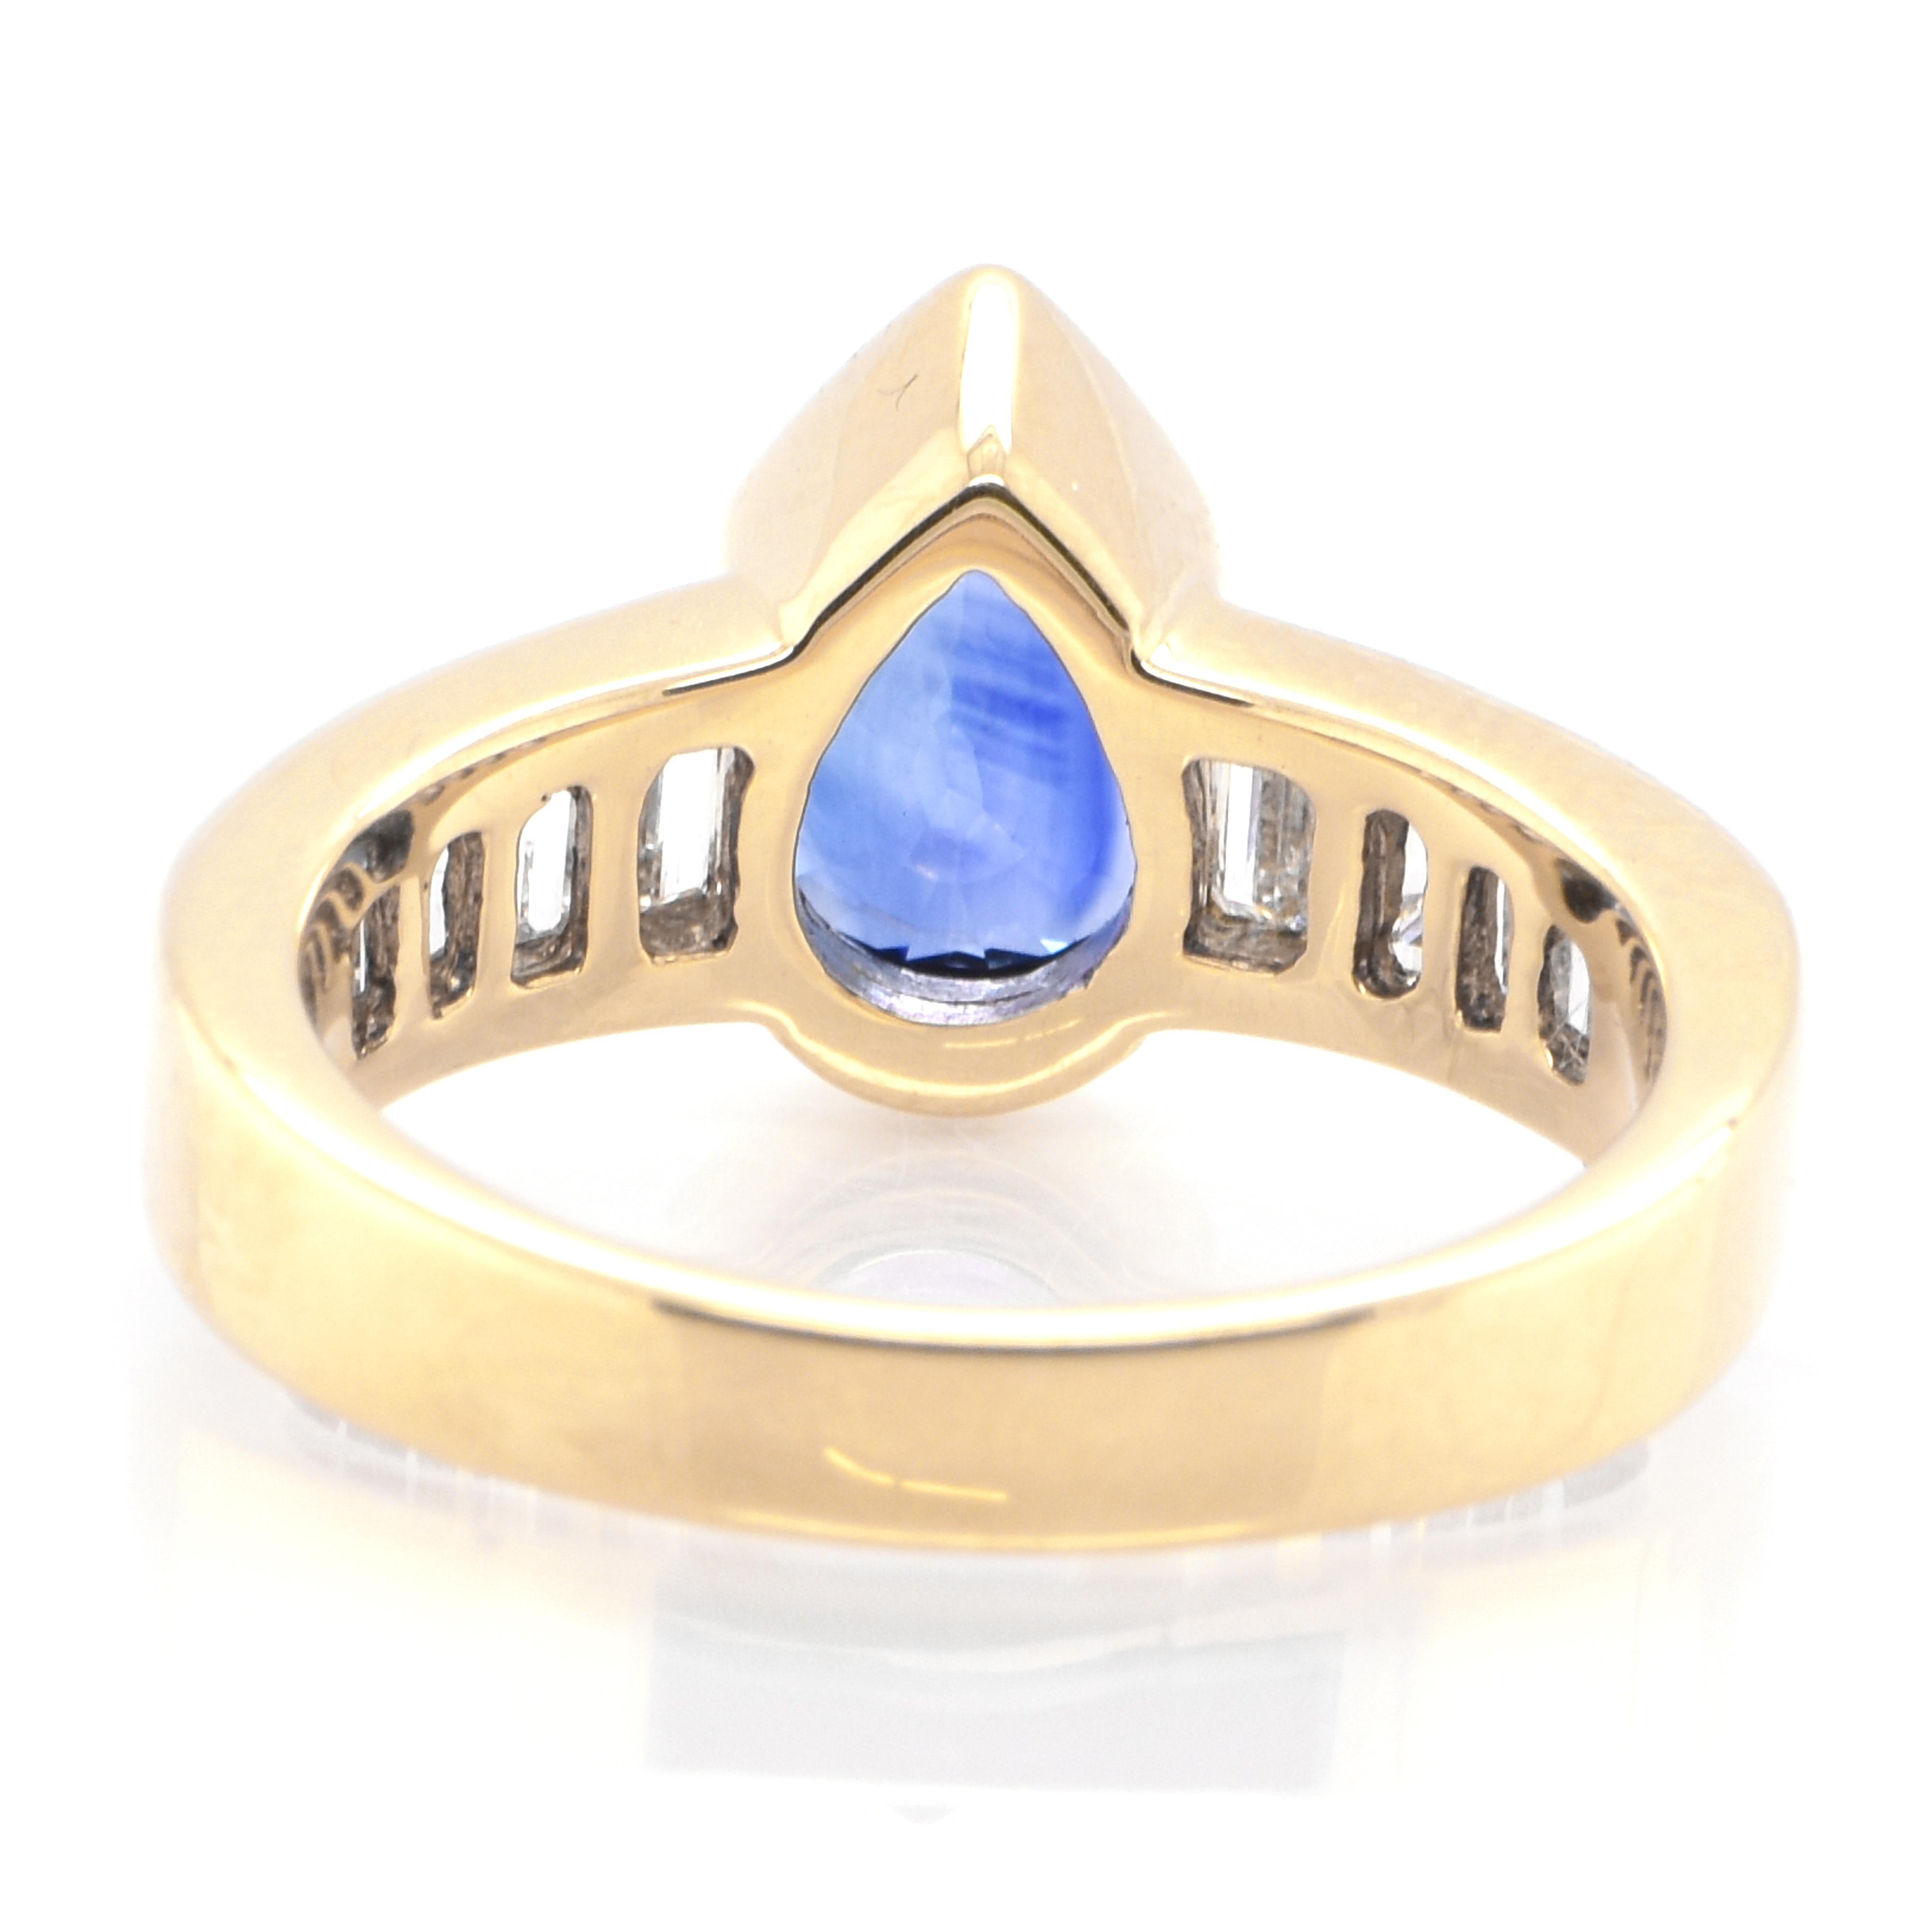 Women's 2.17 Carat Natural Sapphire and Diamond Baguette Ring Set in 18k Yellow Gold